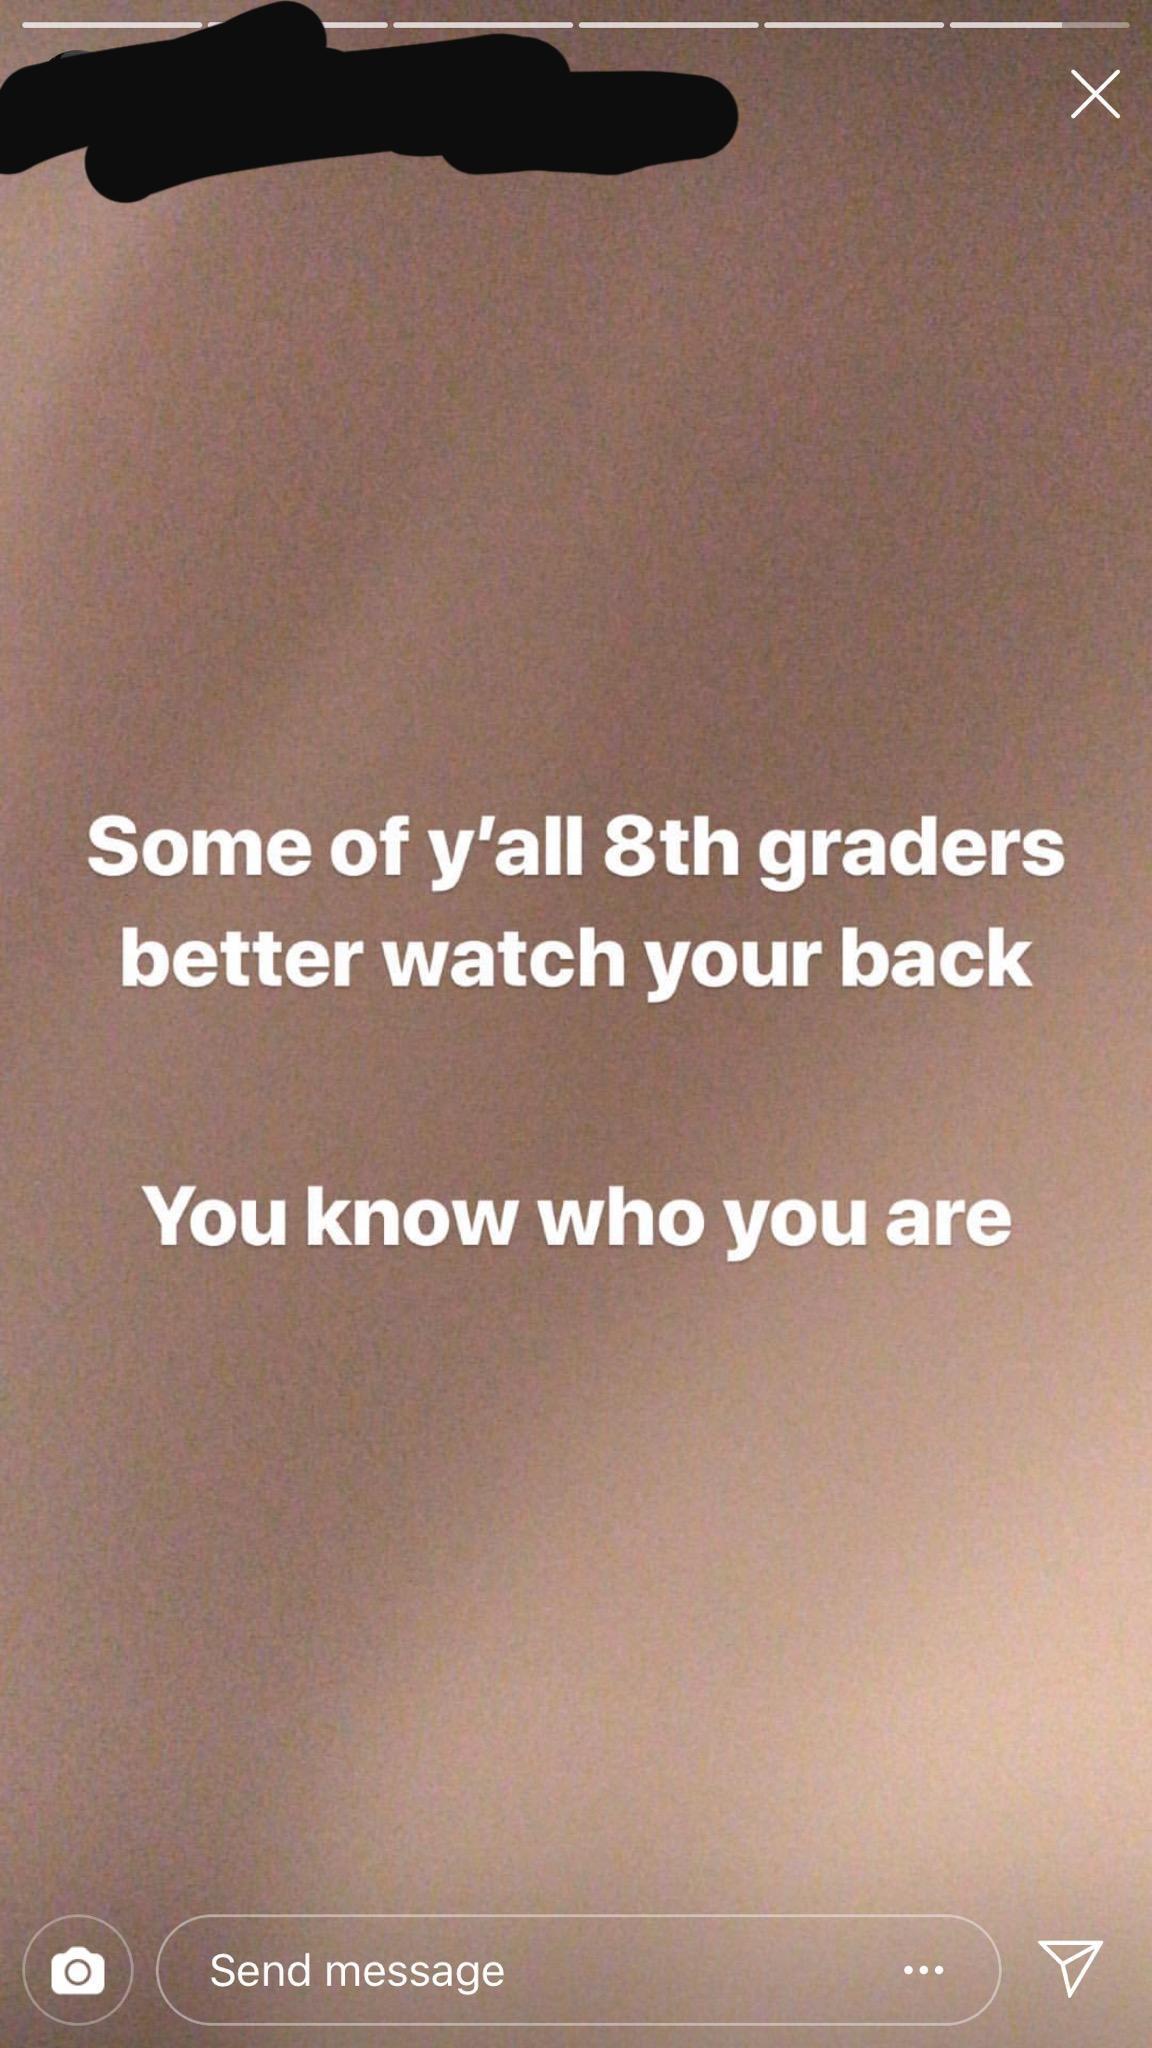 you know you love - Some of y'all 8th graders better watch your back You know who you are Send message